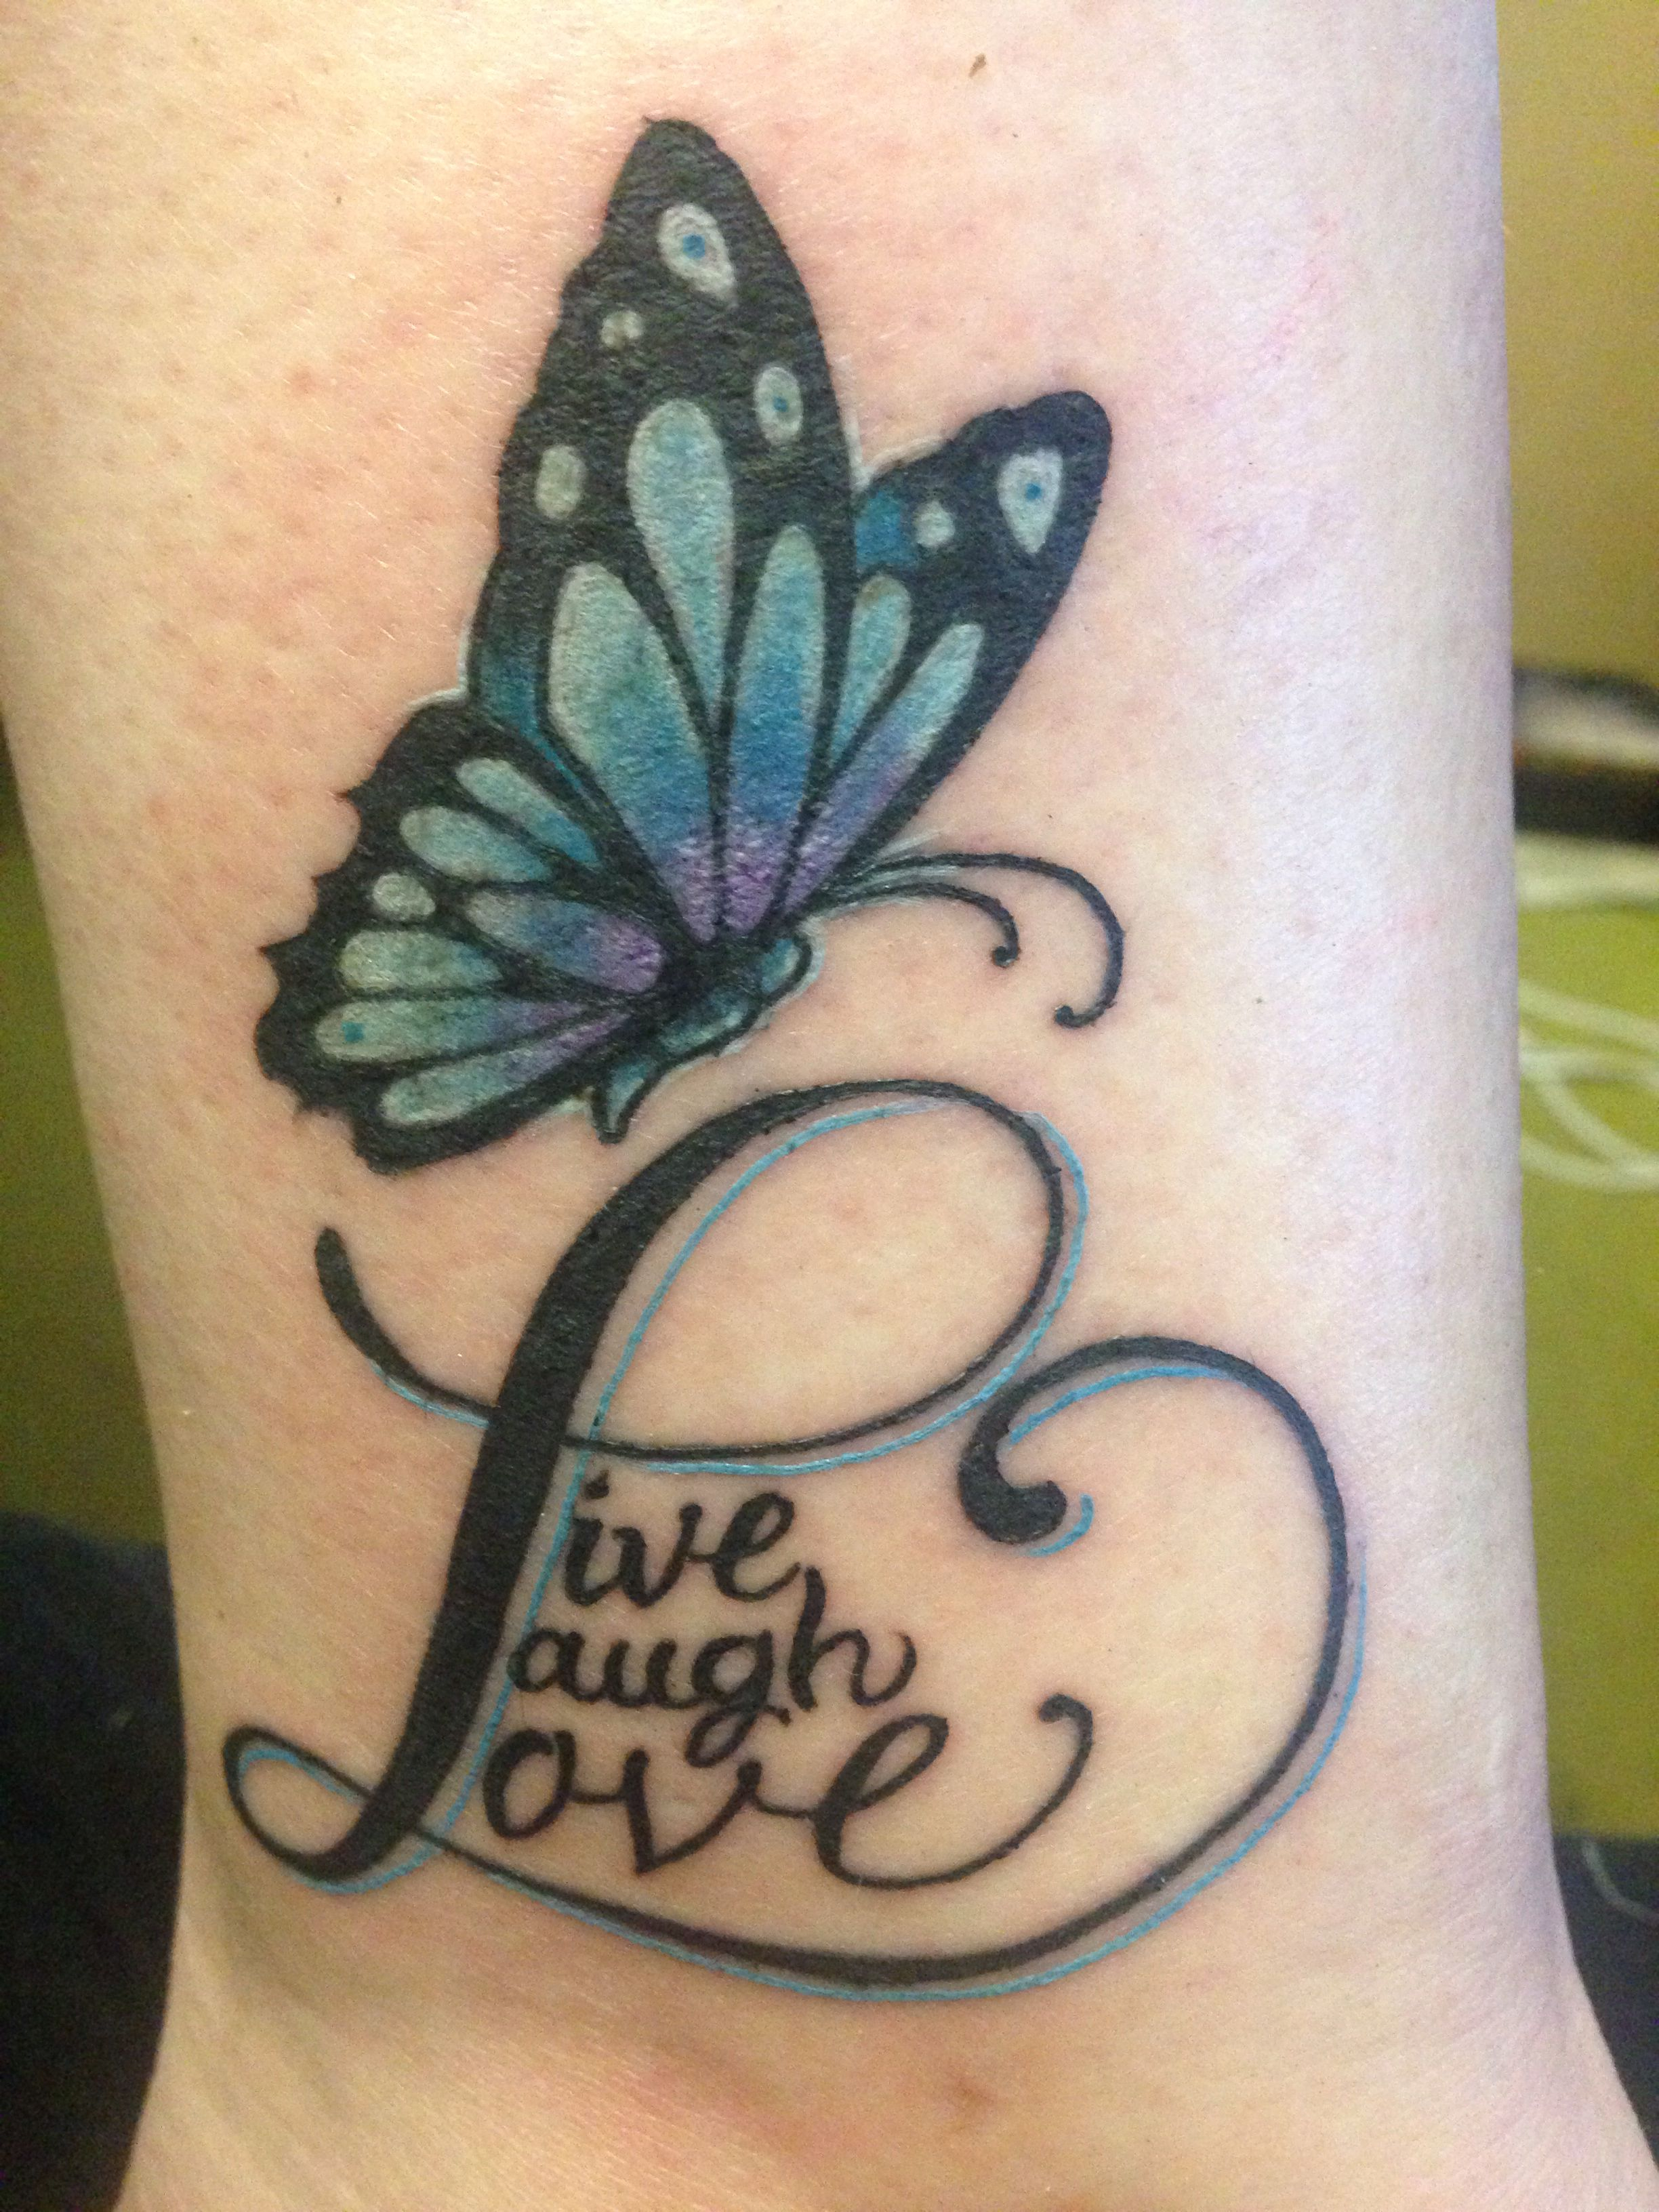 Live Laugh Love Butterfly Tattoo My New Tattoo Nickstegall Tampa with measu...